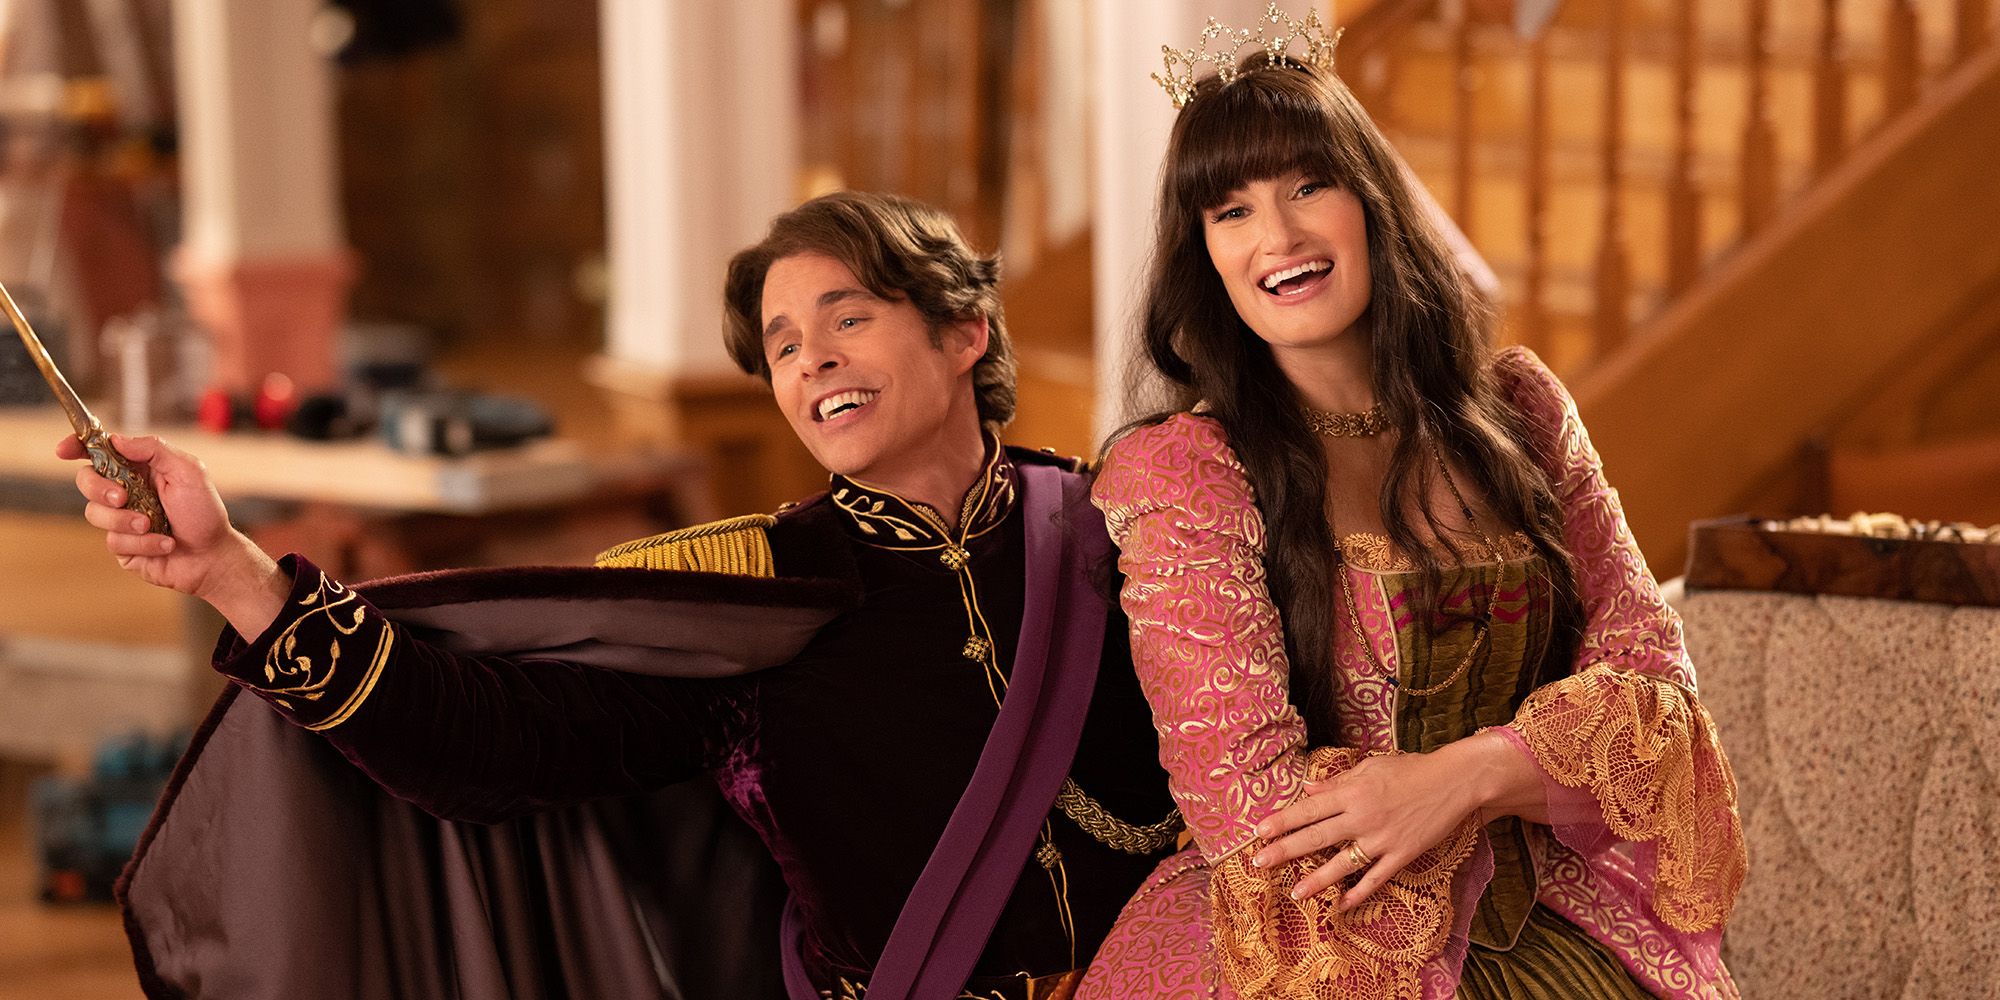 James Marsden as Prince Edward and Idina Menzel as Nancy Tremaine in Disney live-action DISENCHANTED